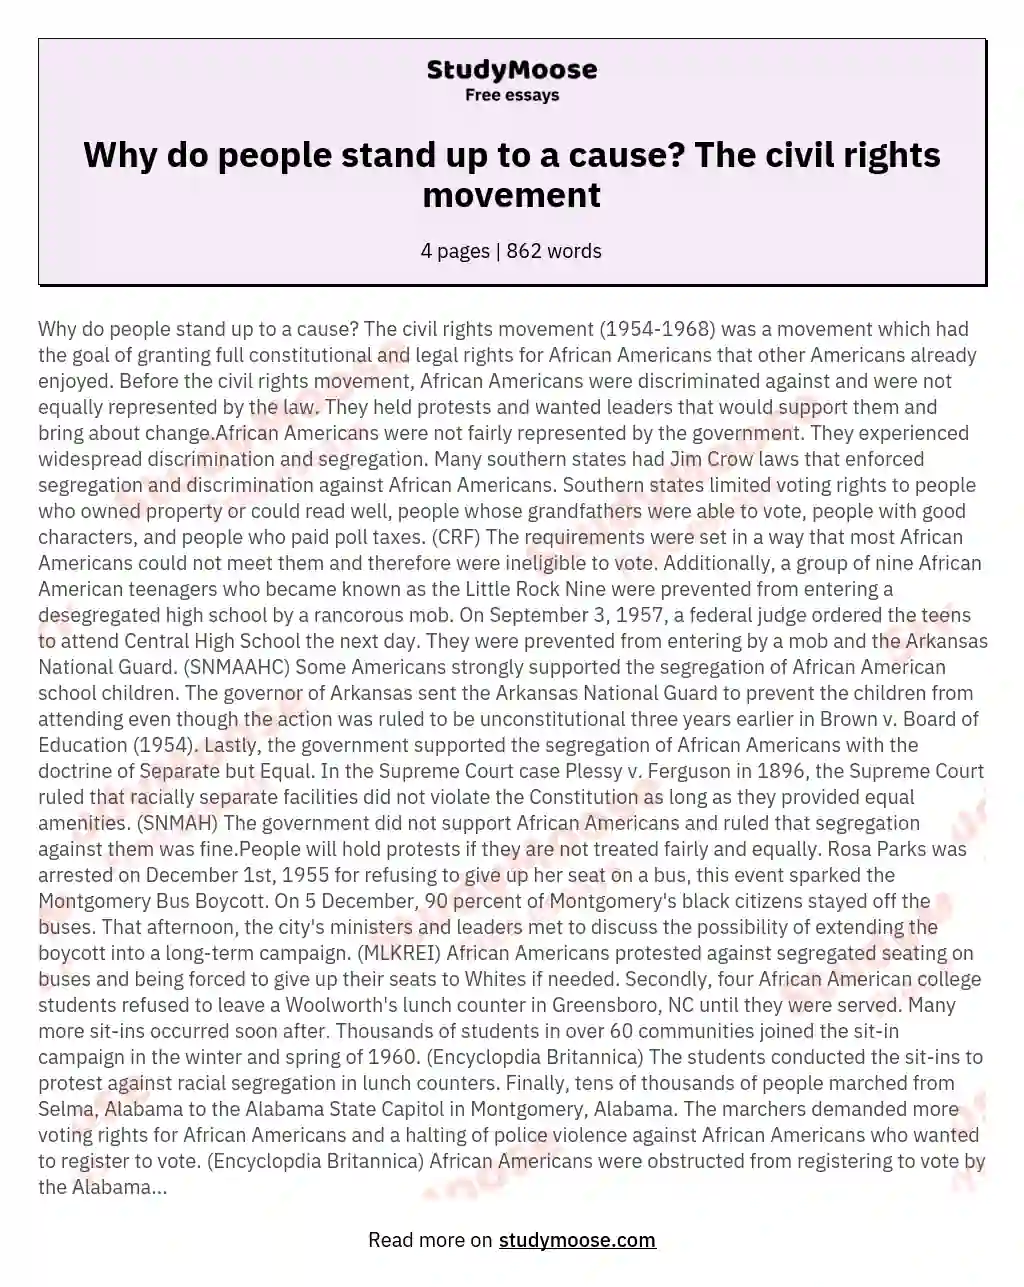 Why do people stand up to a cause? The civil rights movement essay